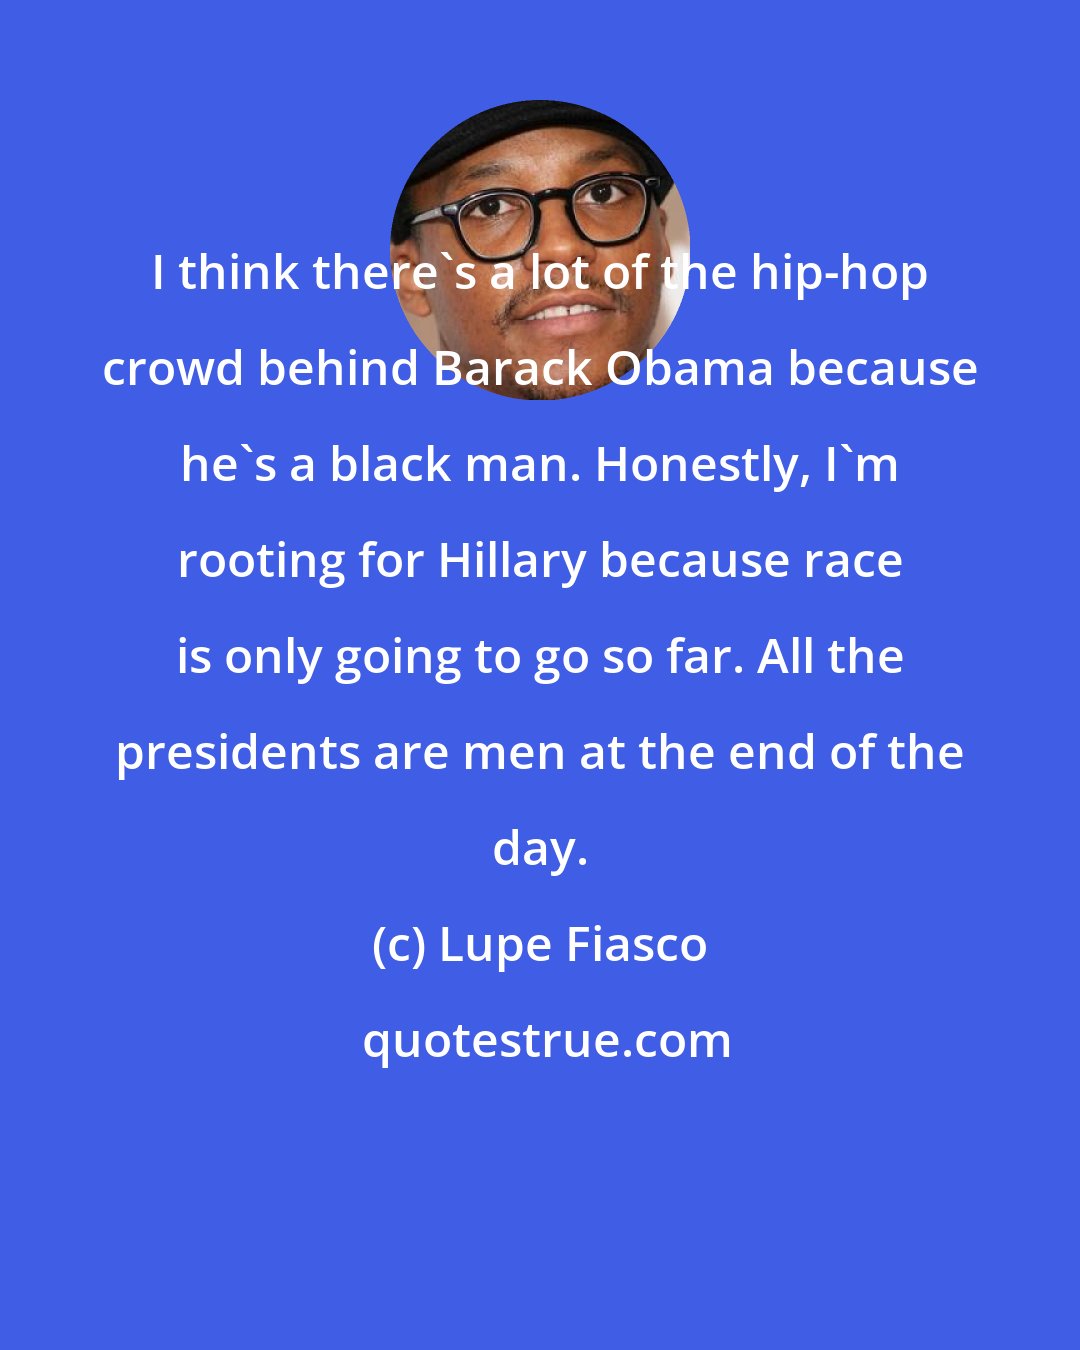 Lupe Fiasco: I think there's a lot of the hip-hop crowd behind Barack Obama because he's a black man. Honestly, I'm rooting for Hillary because race is only going to go so far. All the presidents are men at the end of the day.